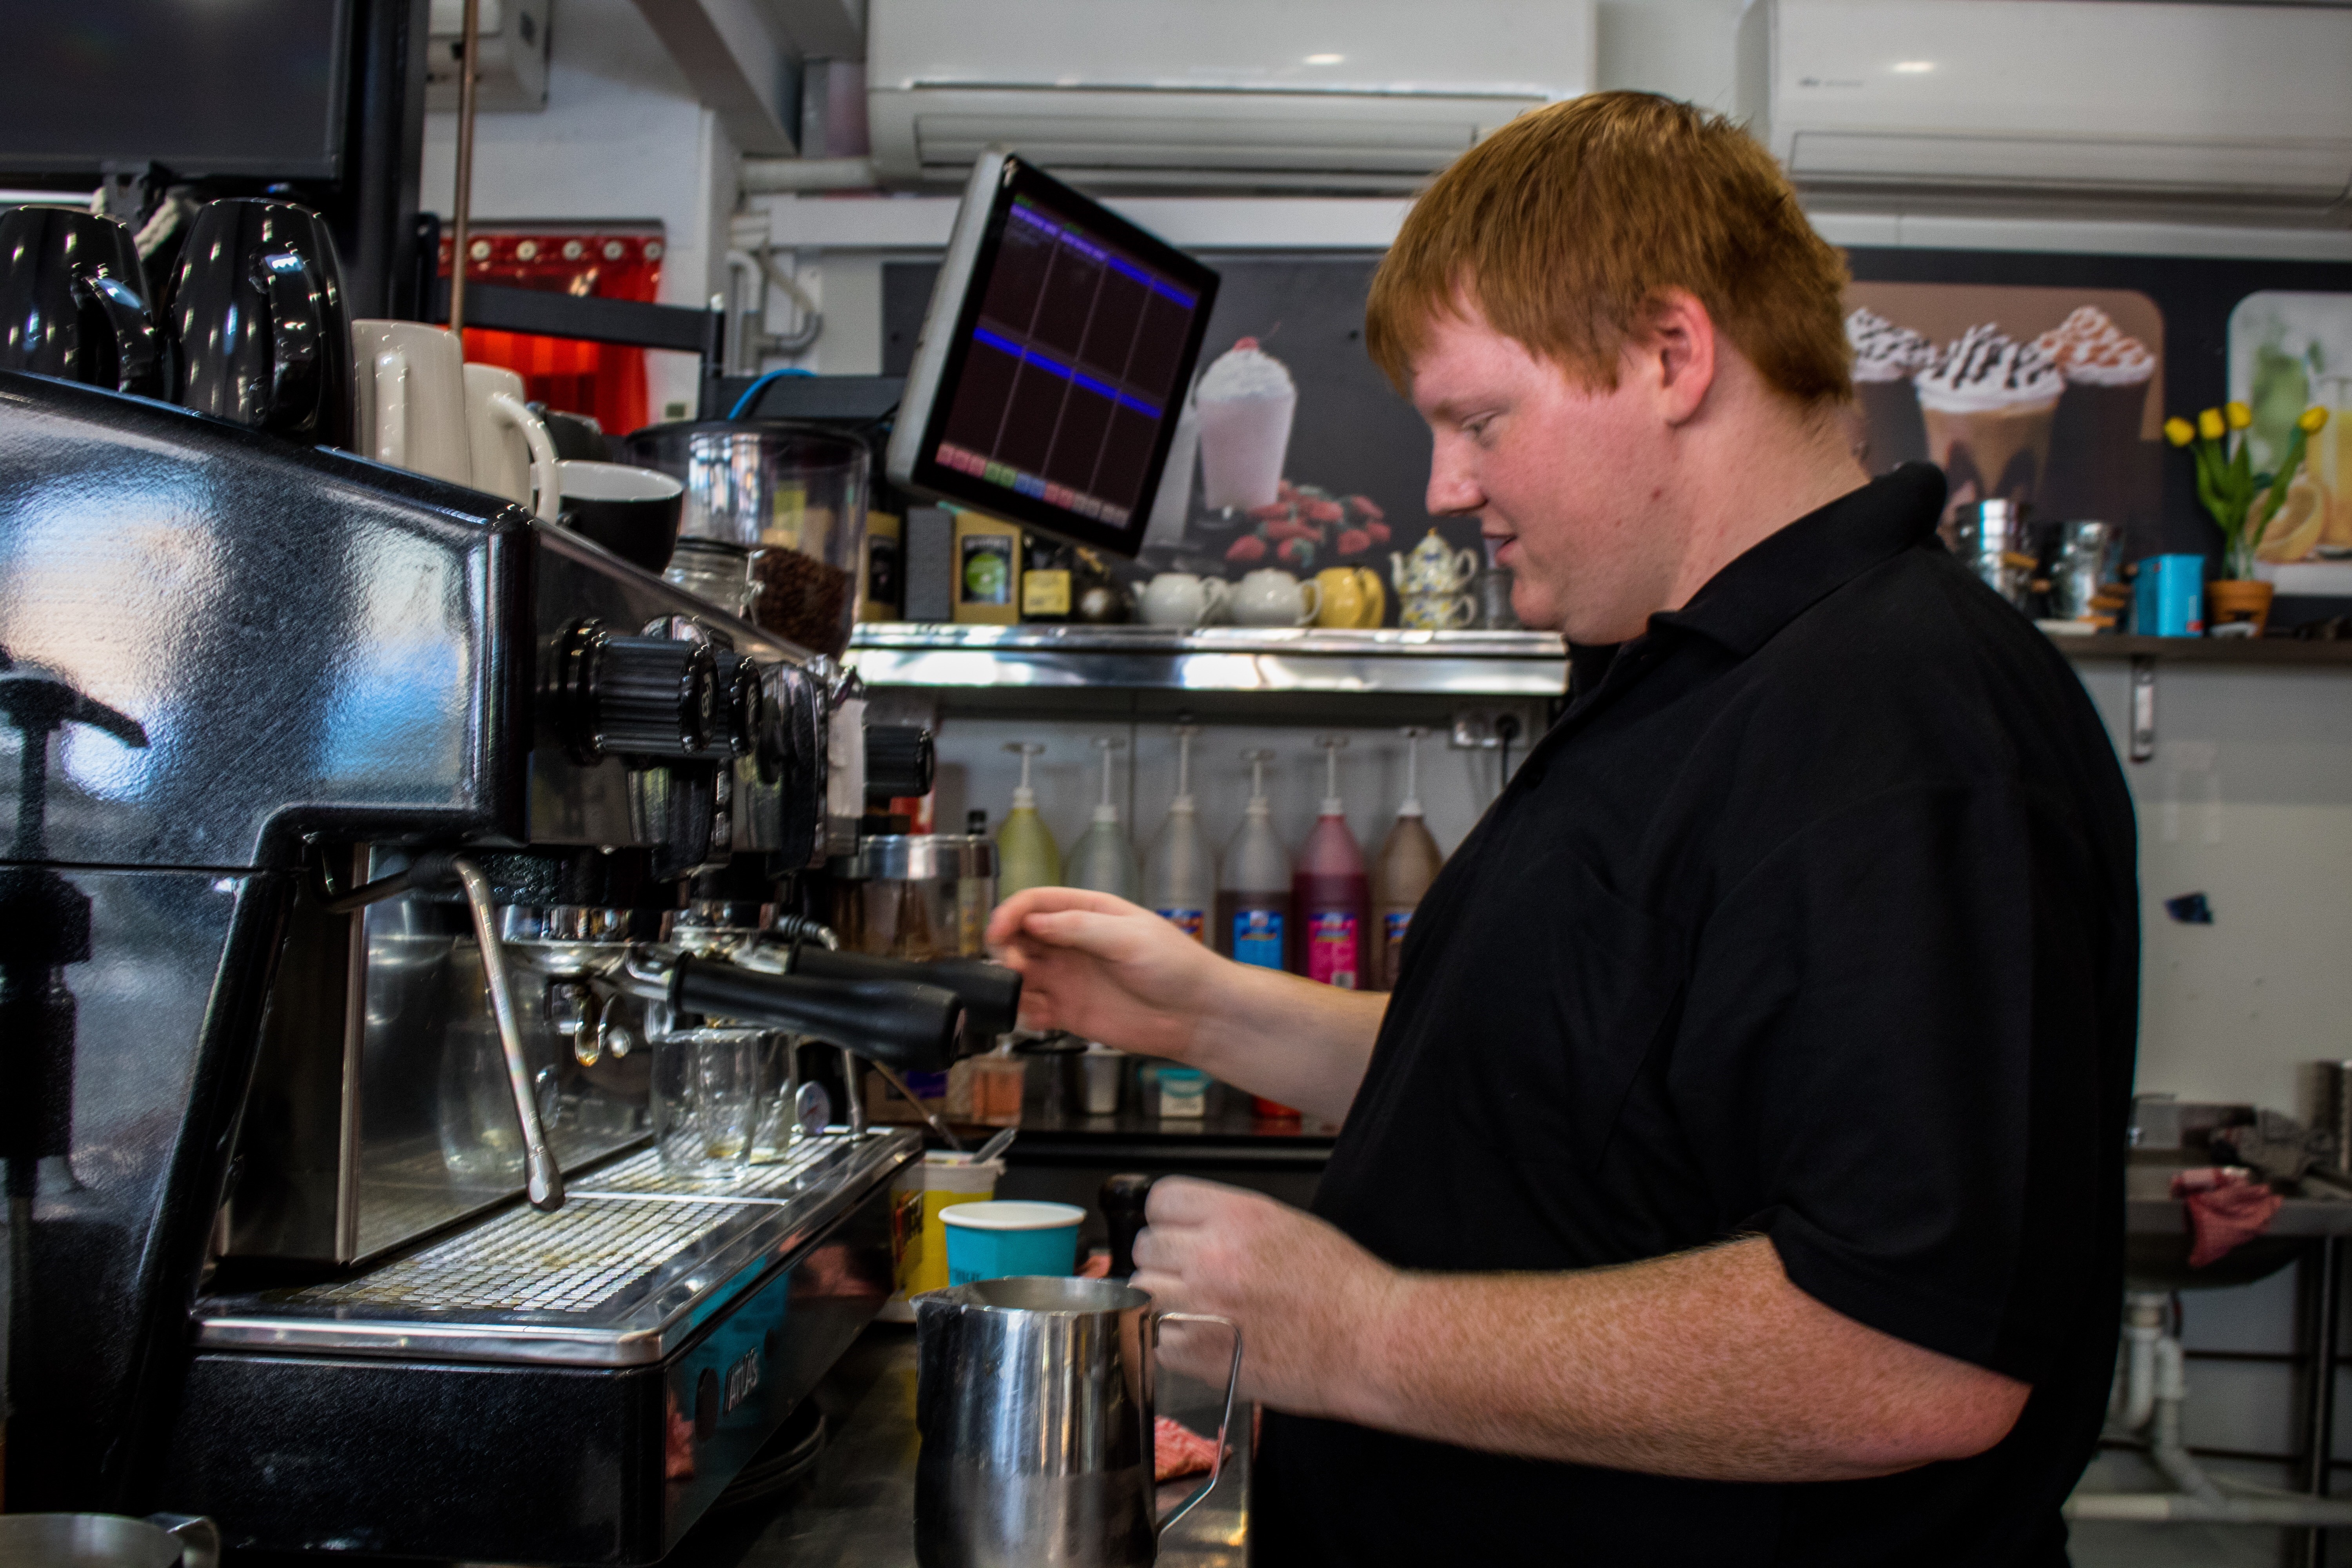 Zach lands his first job out of school at a friendly, local café